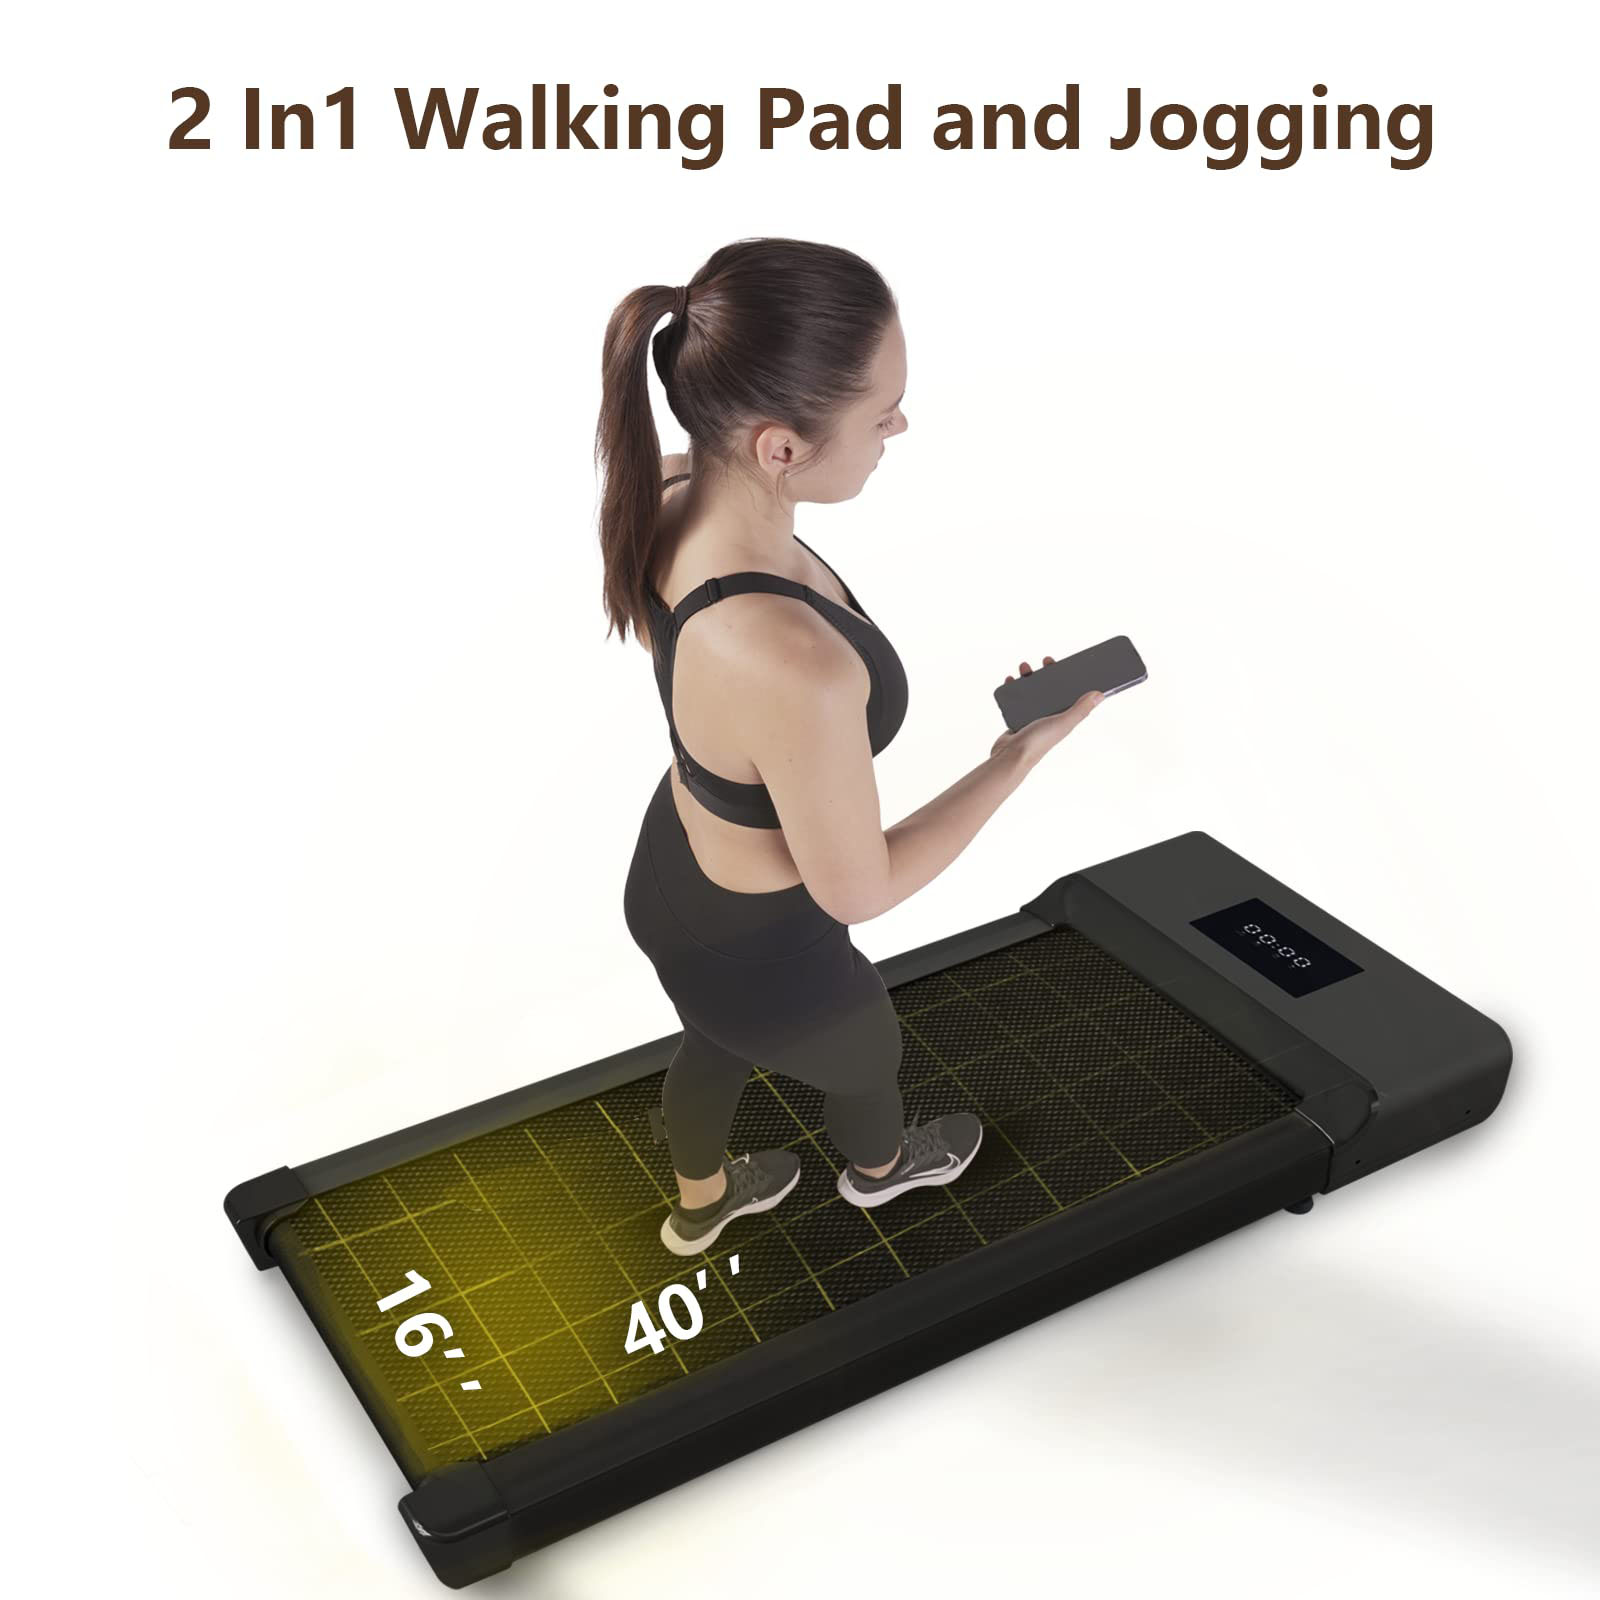 YDZJY 300lb Walking Pad, 40*16 Walking Area 2.5HP Quite Under Desk Treadmill, 2 in 1 Treadmill for Home/Office Exercise with Remote Control, Portable Treadmill in LED Display(Black) - image 5 of 8